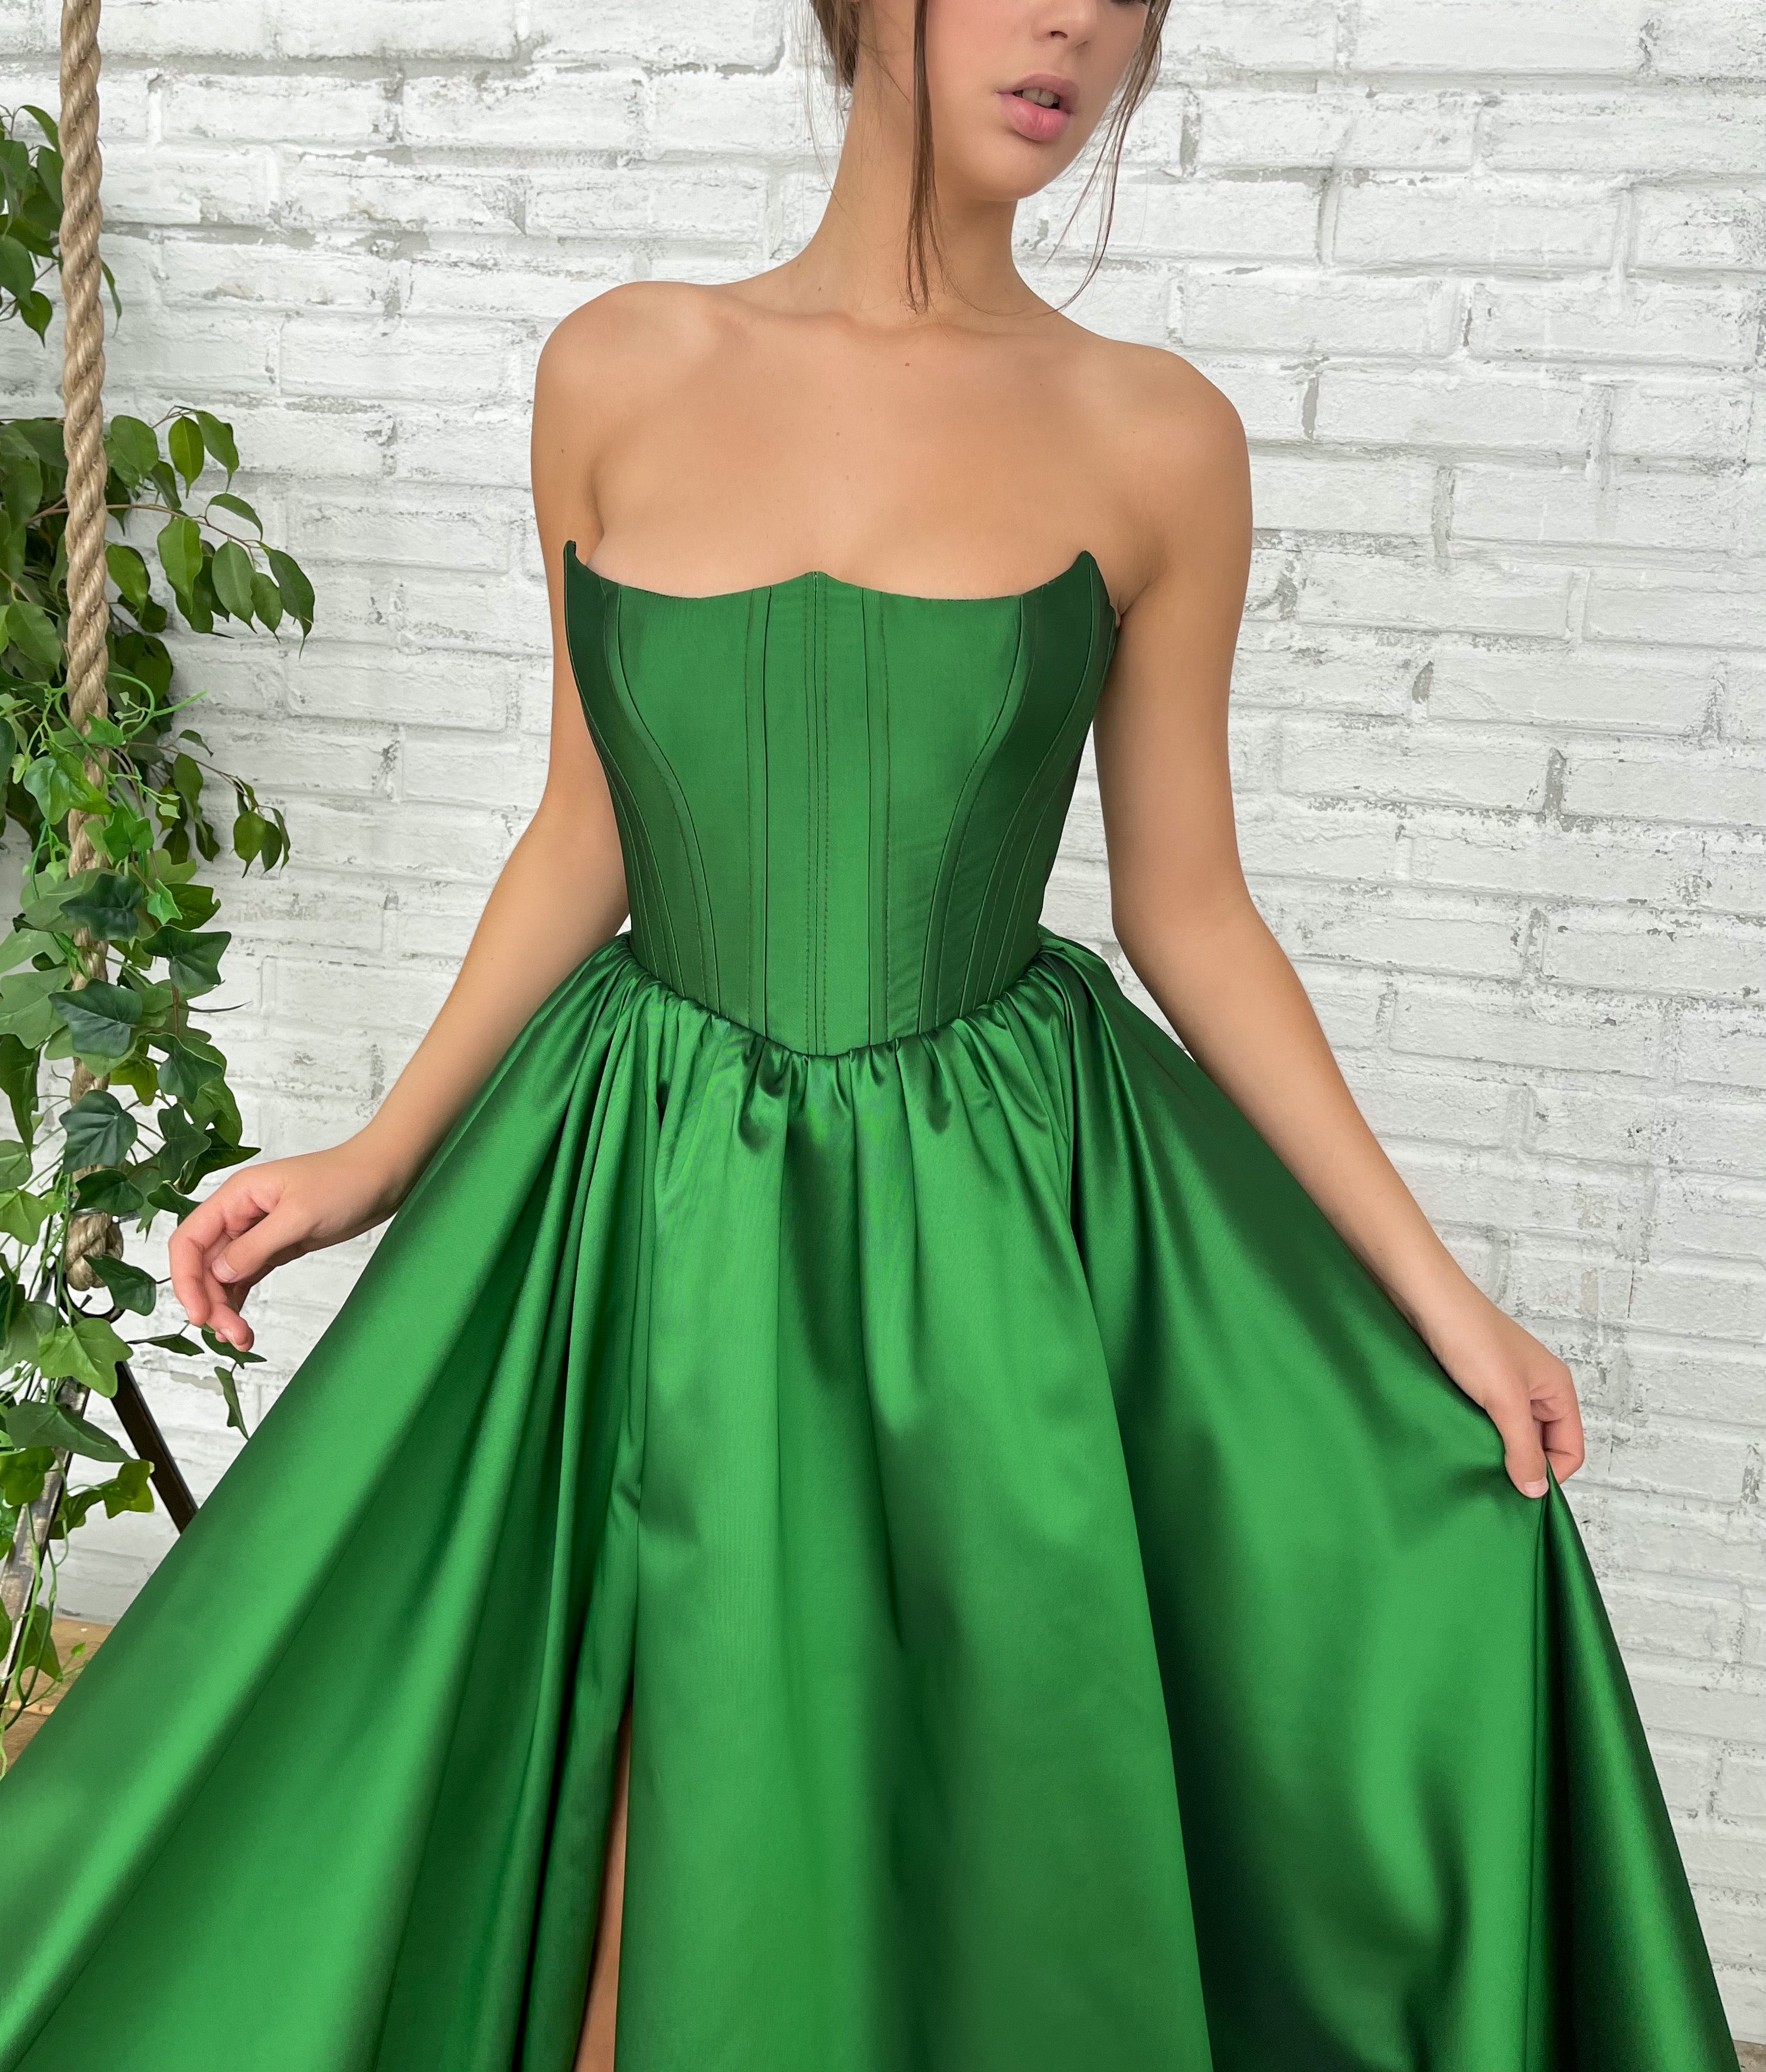 Green A-Line dress with no sleeves